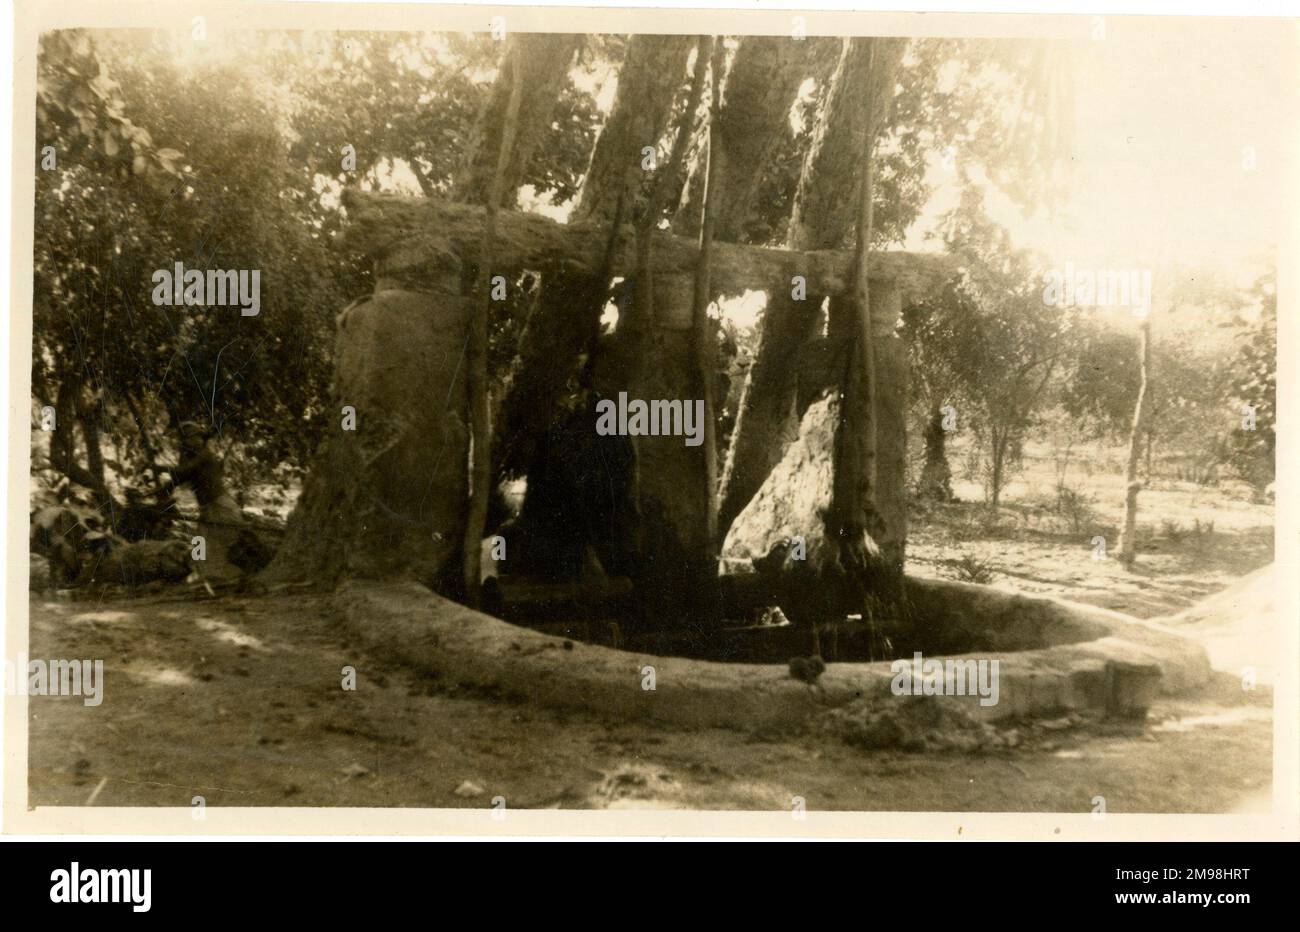 Water well for irrigation, Shadoof (Shaduf), Egypt, North Africa. Stock Photo